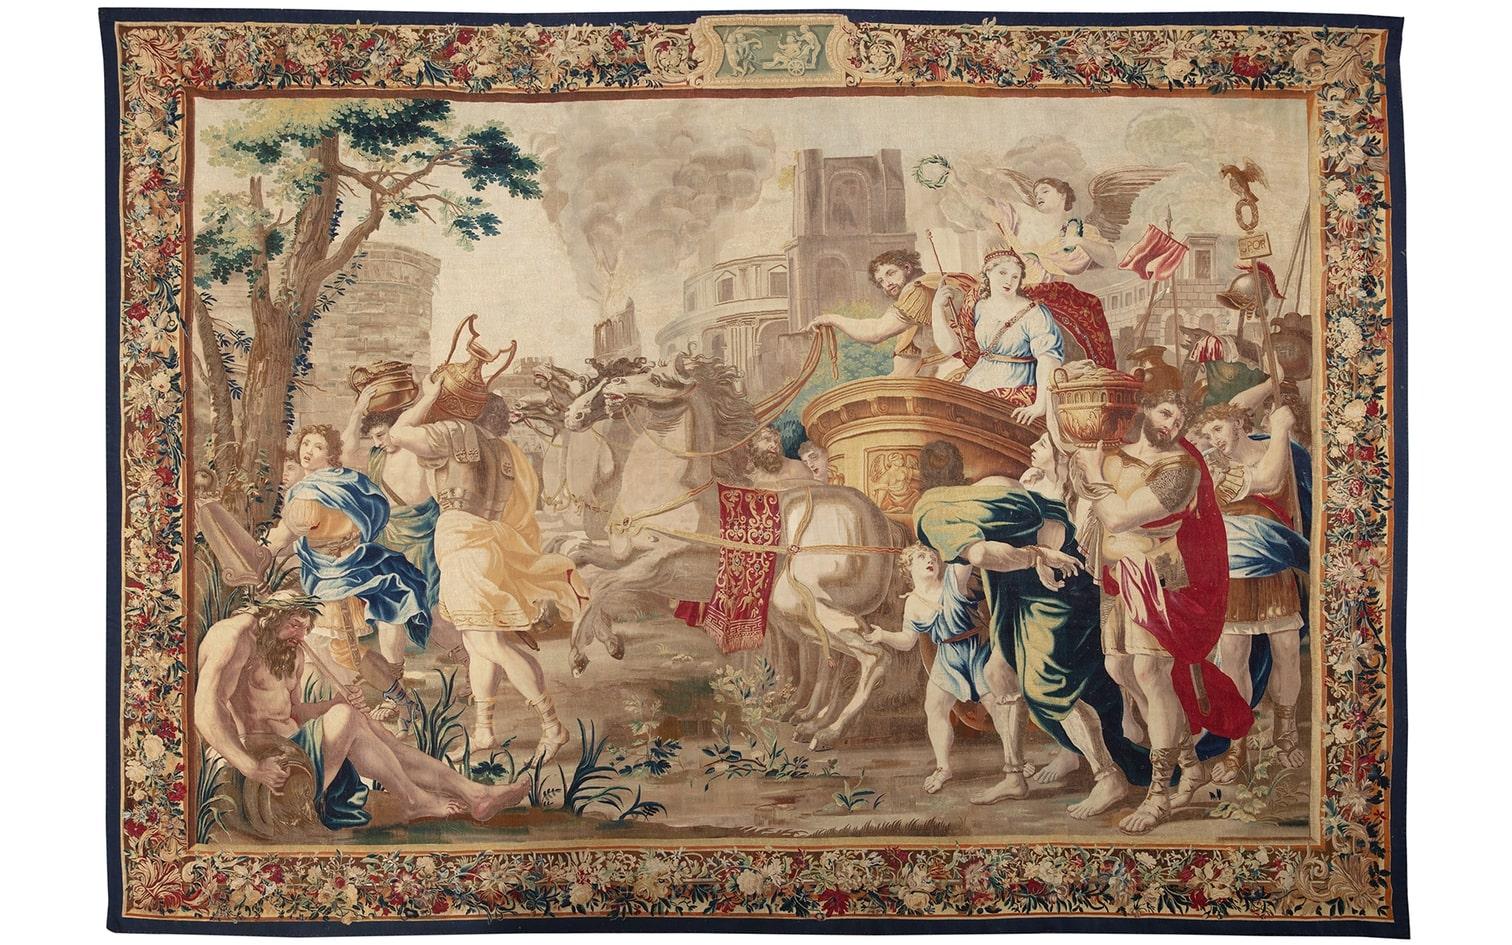 A brussels tapestry of Marc Antony and Cleopatra,
After designs by charles poerson (1609–1667), second half 17th century
- second half 17th century

Property from a Midwest Educational Institution

Materials : Wool and silk

Dimensions : 12 ft. 6